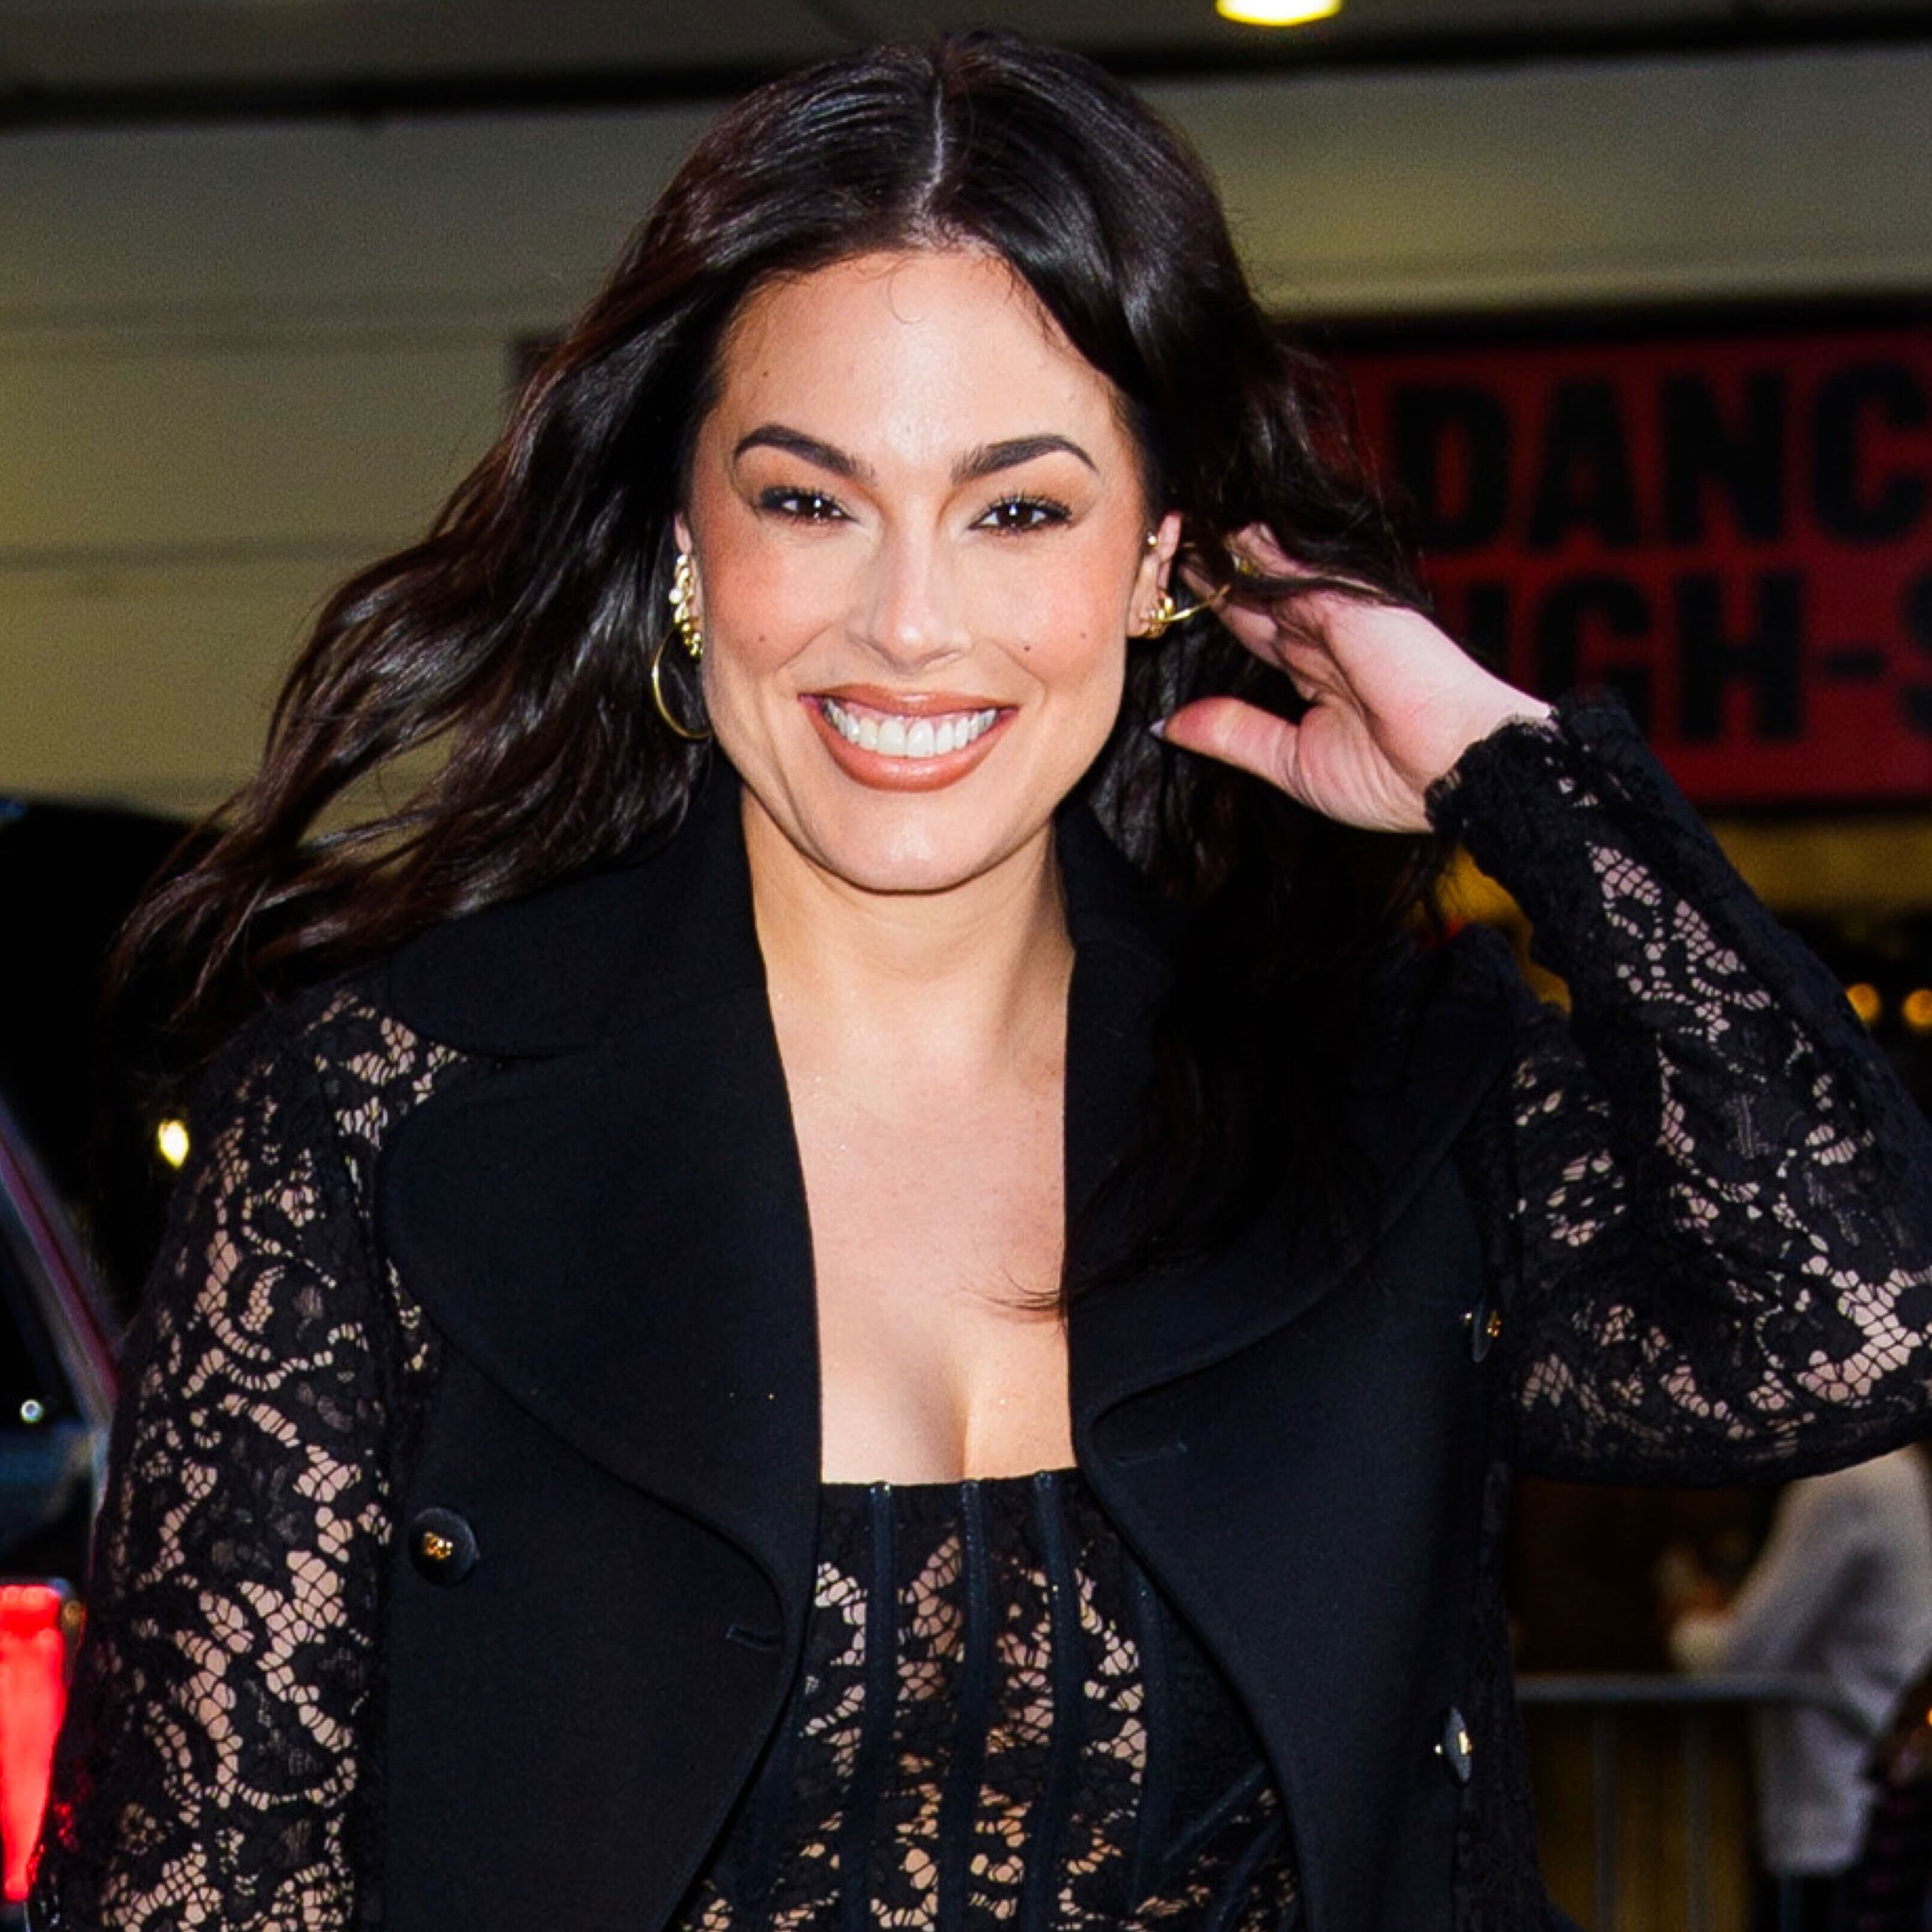 Ashley Graham Wore the Flat Shoe Trend That Just Won't Quit